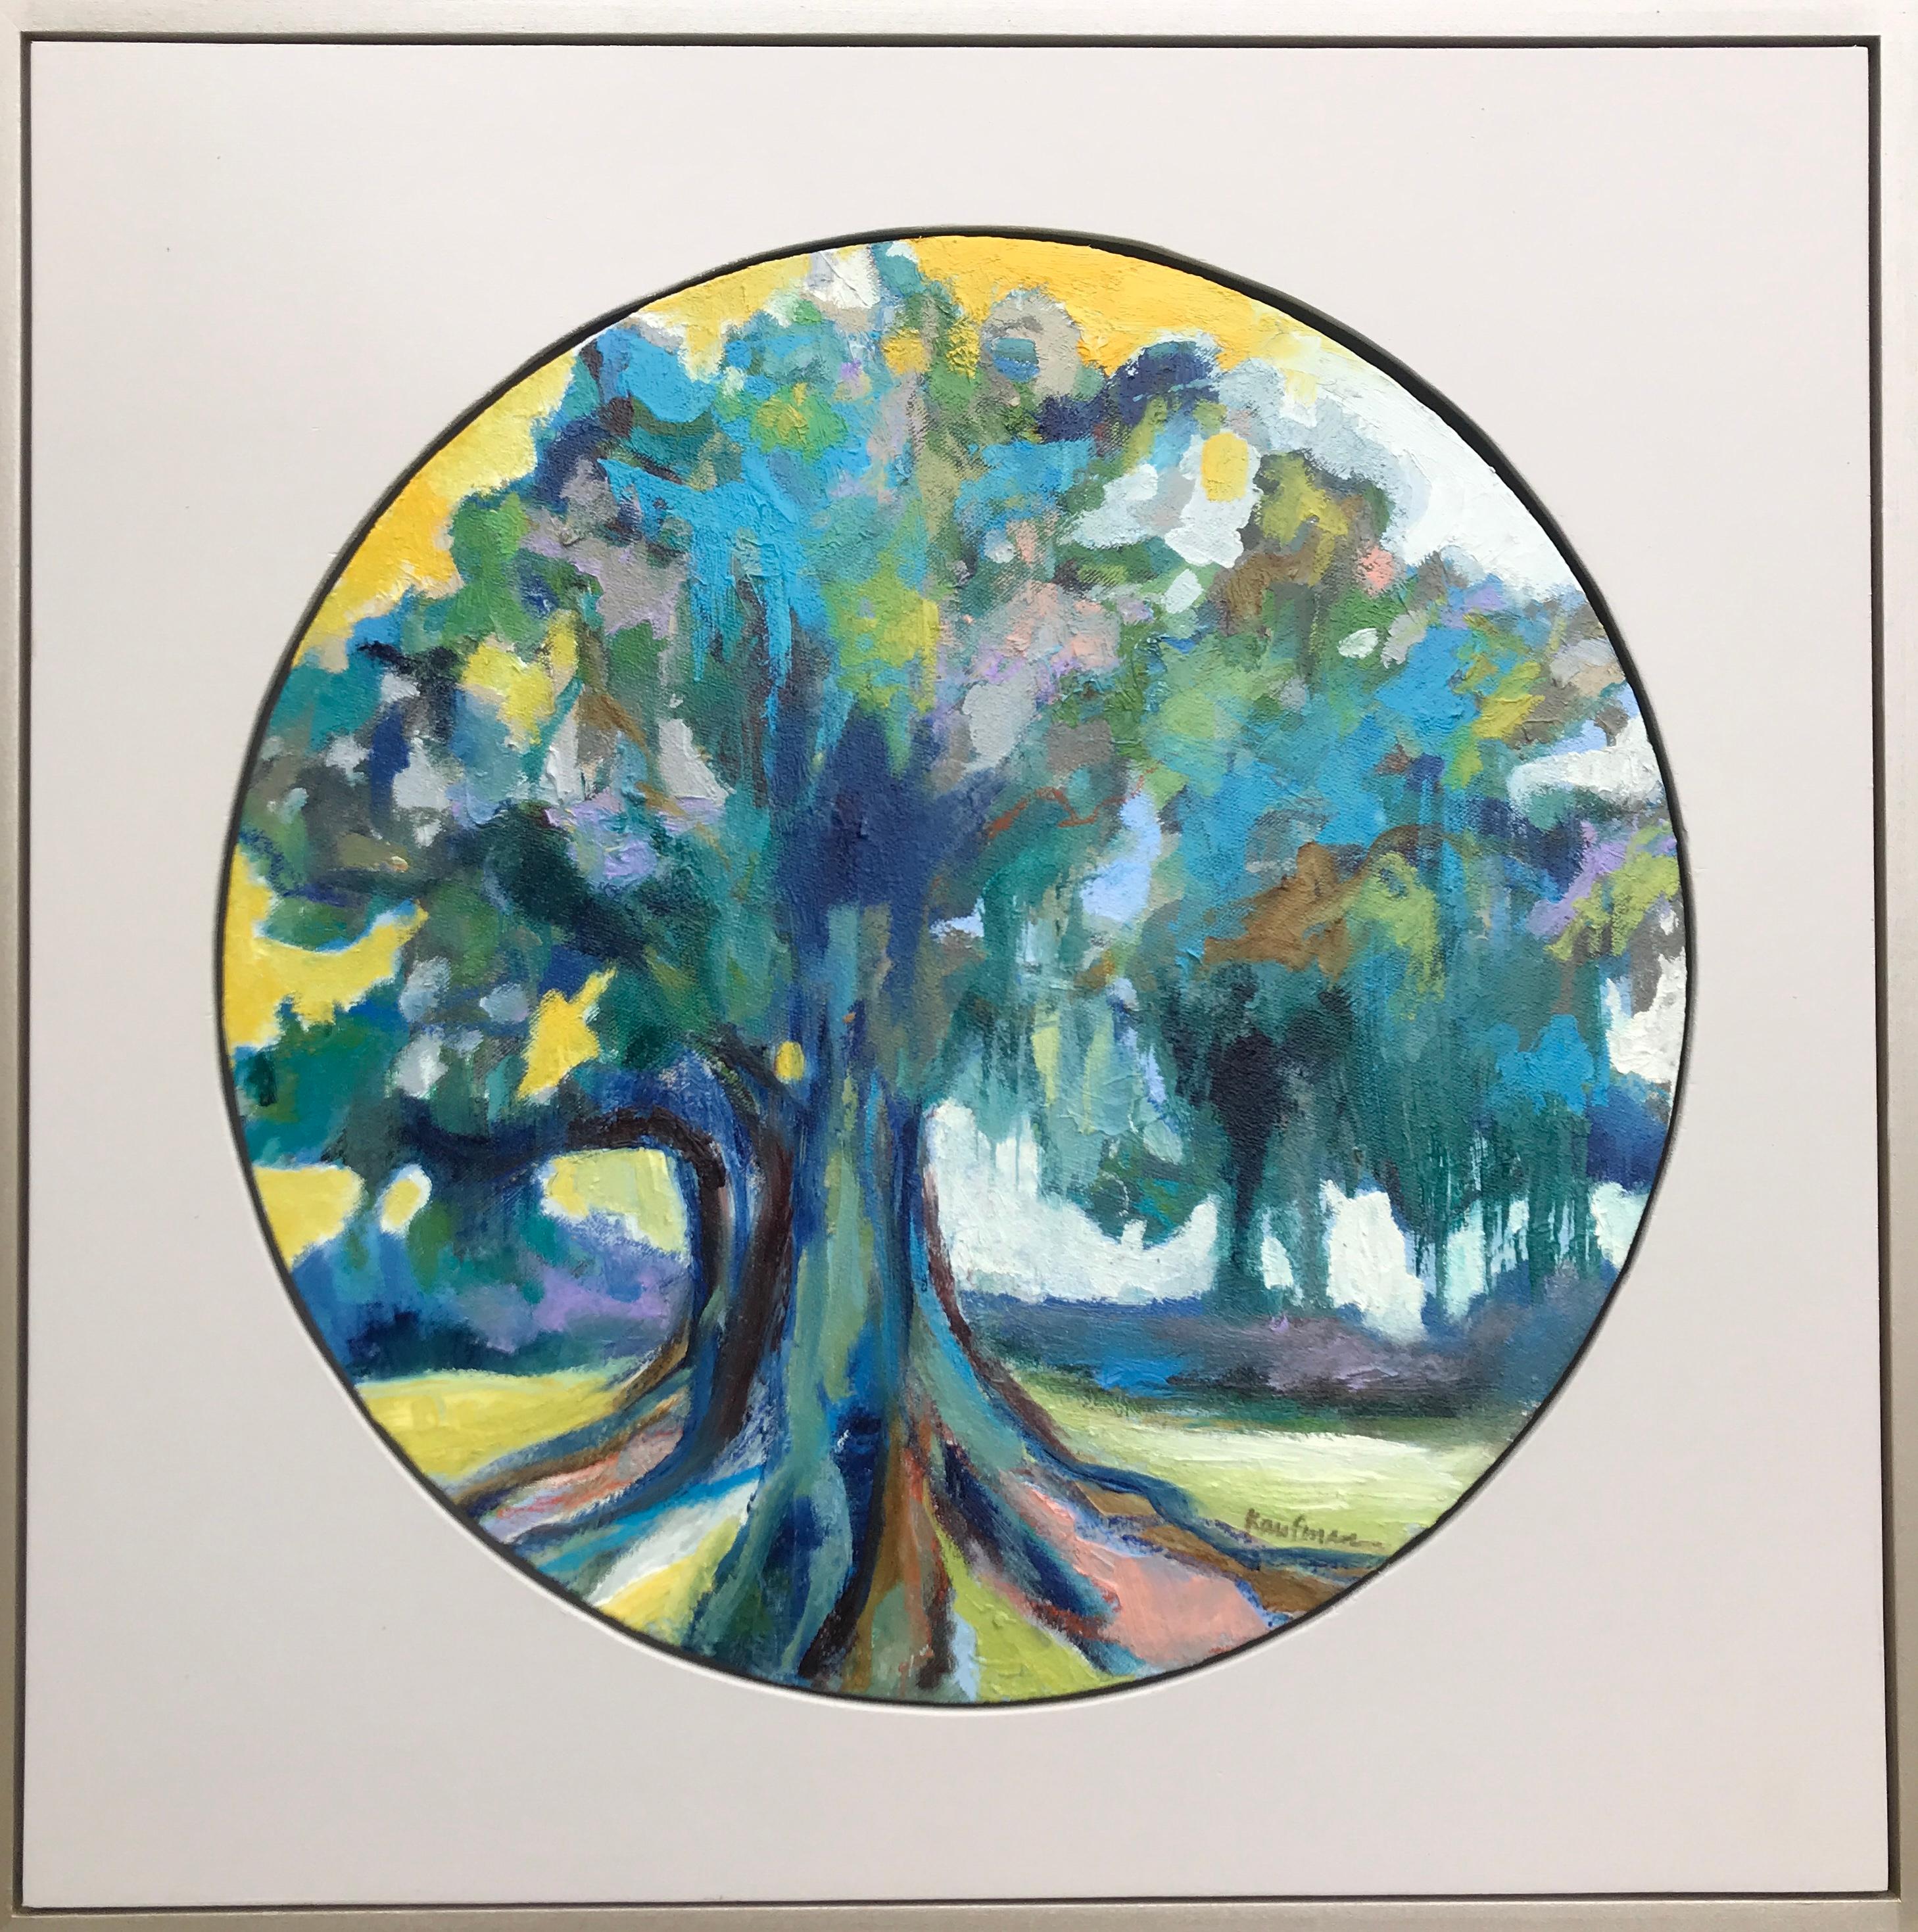 'Oak I' is a small oil and wax on canvas circular landscape painting set inside a square frame, created by American artist Kelli Kaufman in 2018. Featuring an exquisite palette made of a lovely tonality of green, blue and yellow, the painting